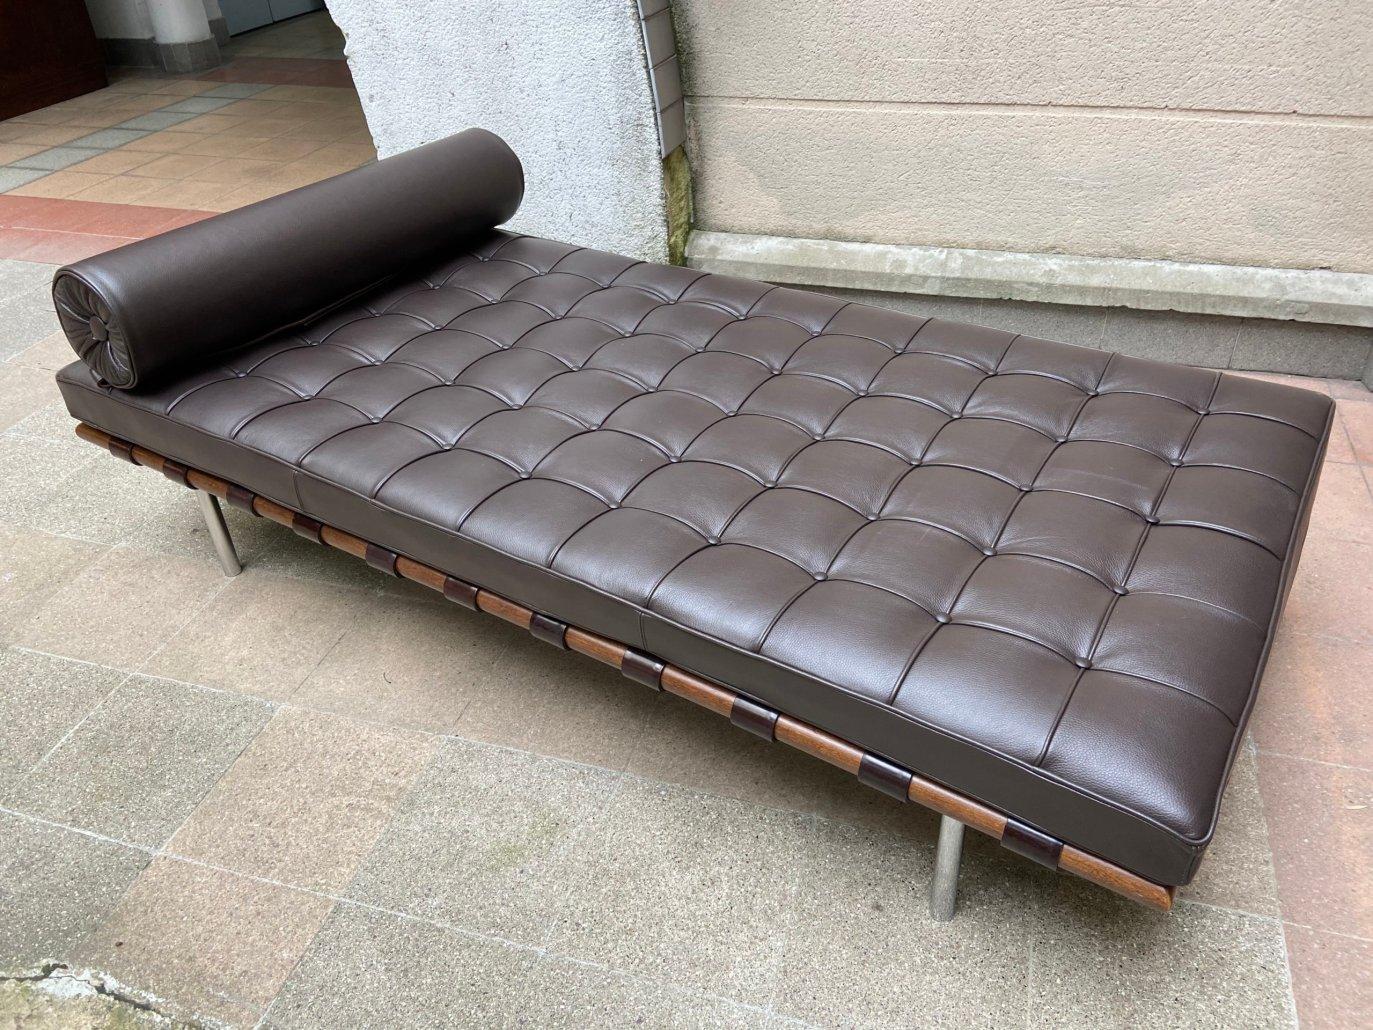 Mies van der Rohe - Barcelona daybed dark brown
Knoll edition,
circa 2017
Brown leather and ashwood
Dimensions: Height 65 cm, large 98, long 196 cm
In a perfect state
With certificate.